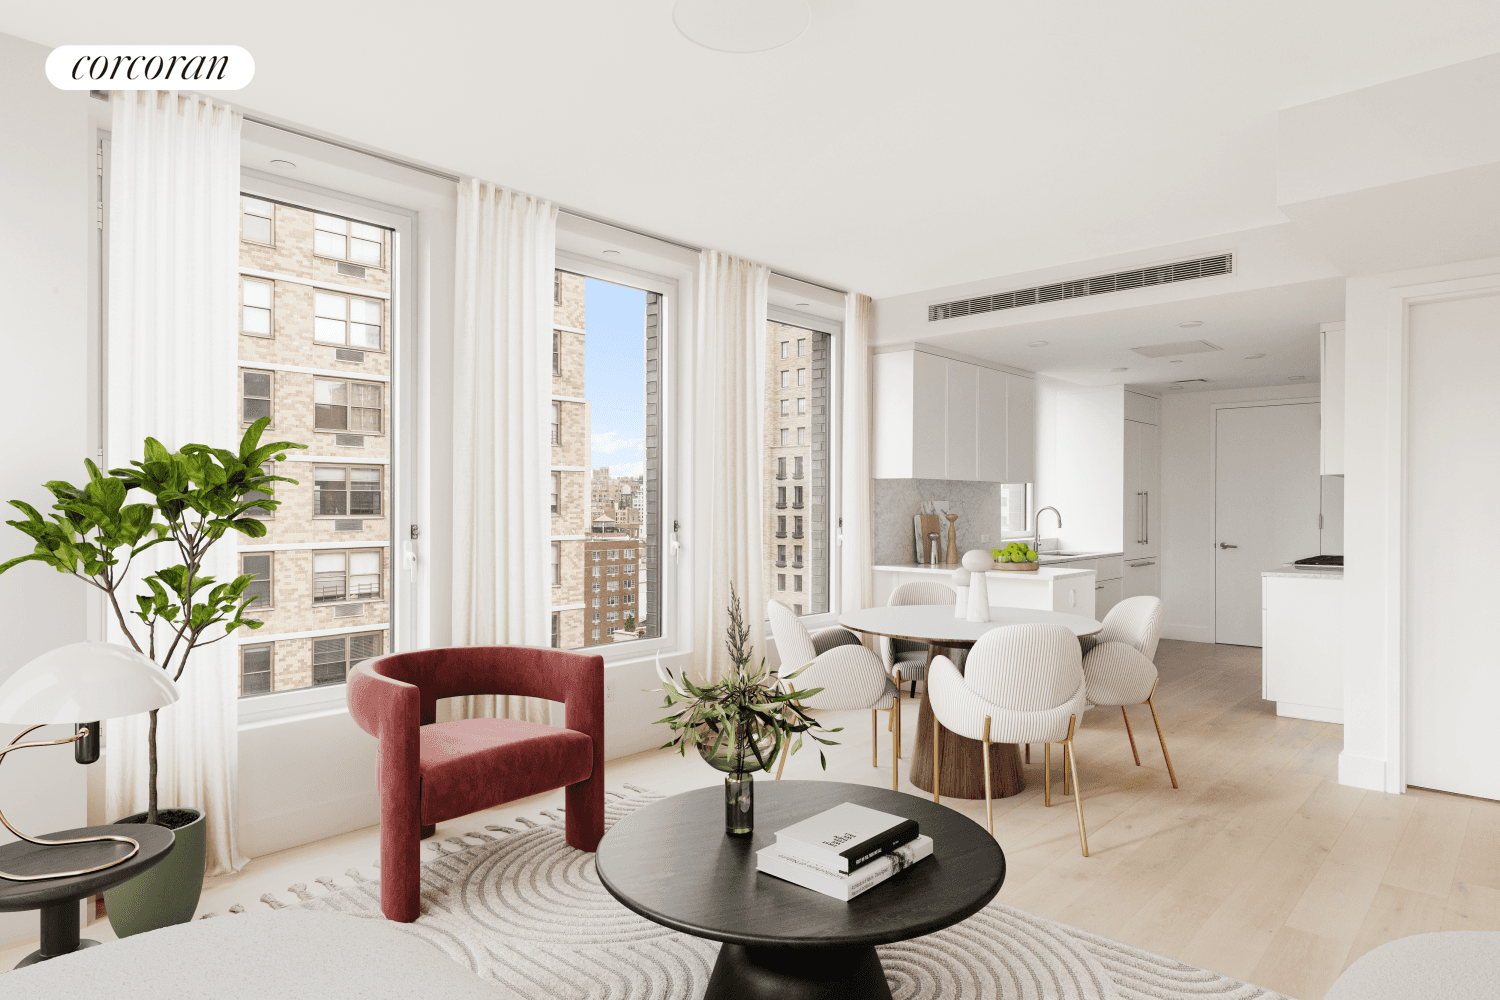 4th Floor at 323 East 79th StreetThree Bedroom Two Baths Powder Room Private Outdoor Space 1, 856 sqft323 E 79th Street offers a blend of contemporary elegance and modern comfort ...